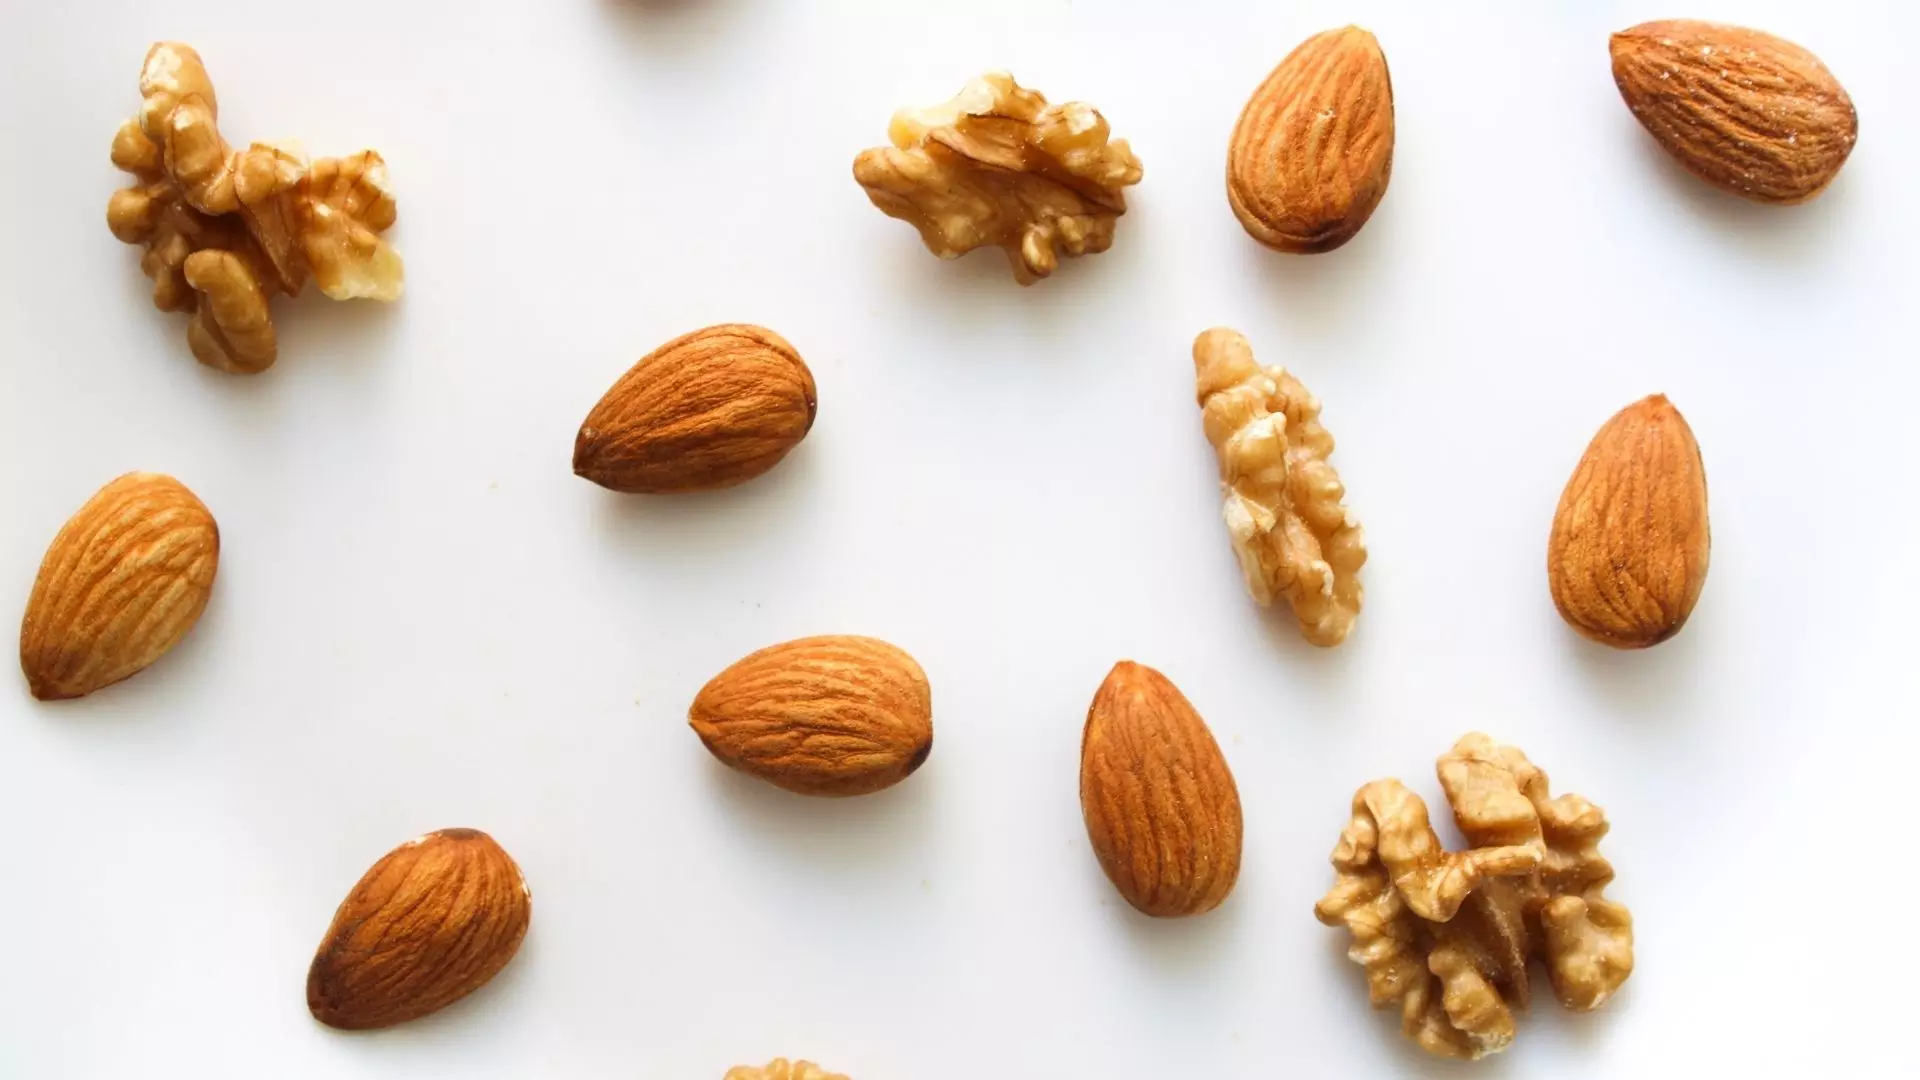 Why were nuts about the health benefits of walnuts, anjeers and almonds